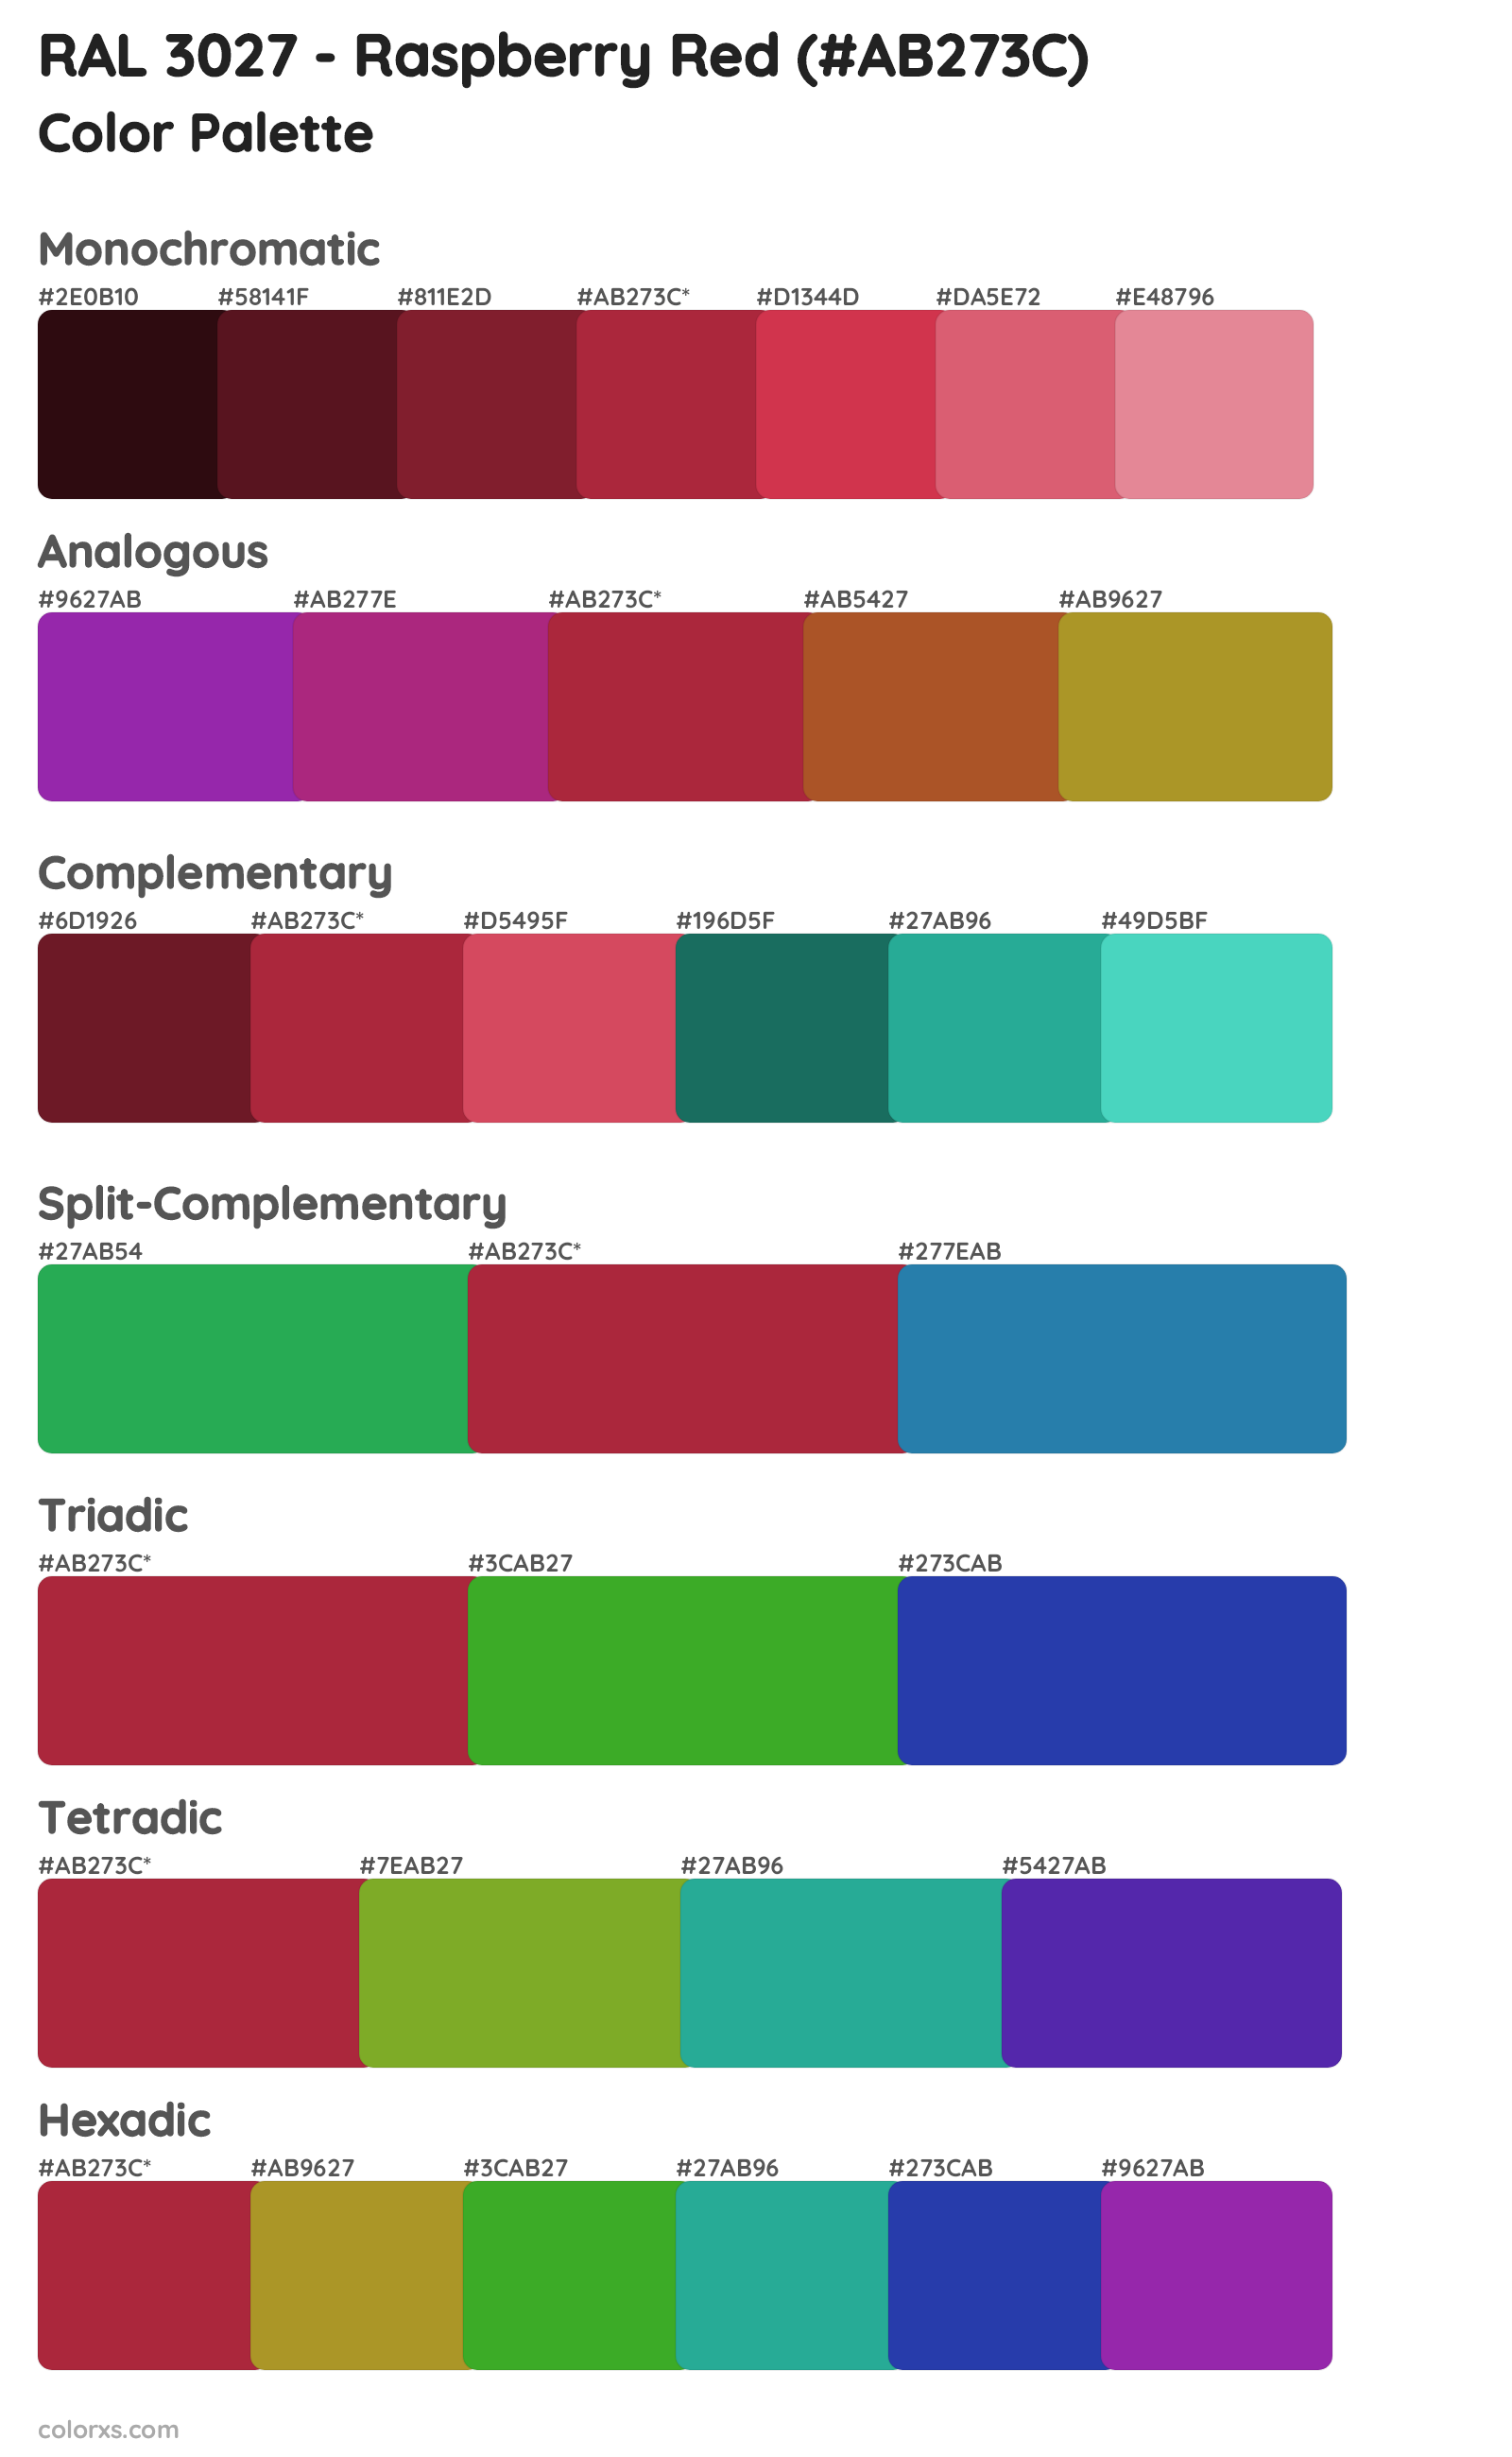 RAL 3027 - Raspberry Red Color Scheme Palettes